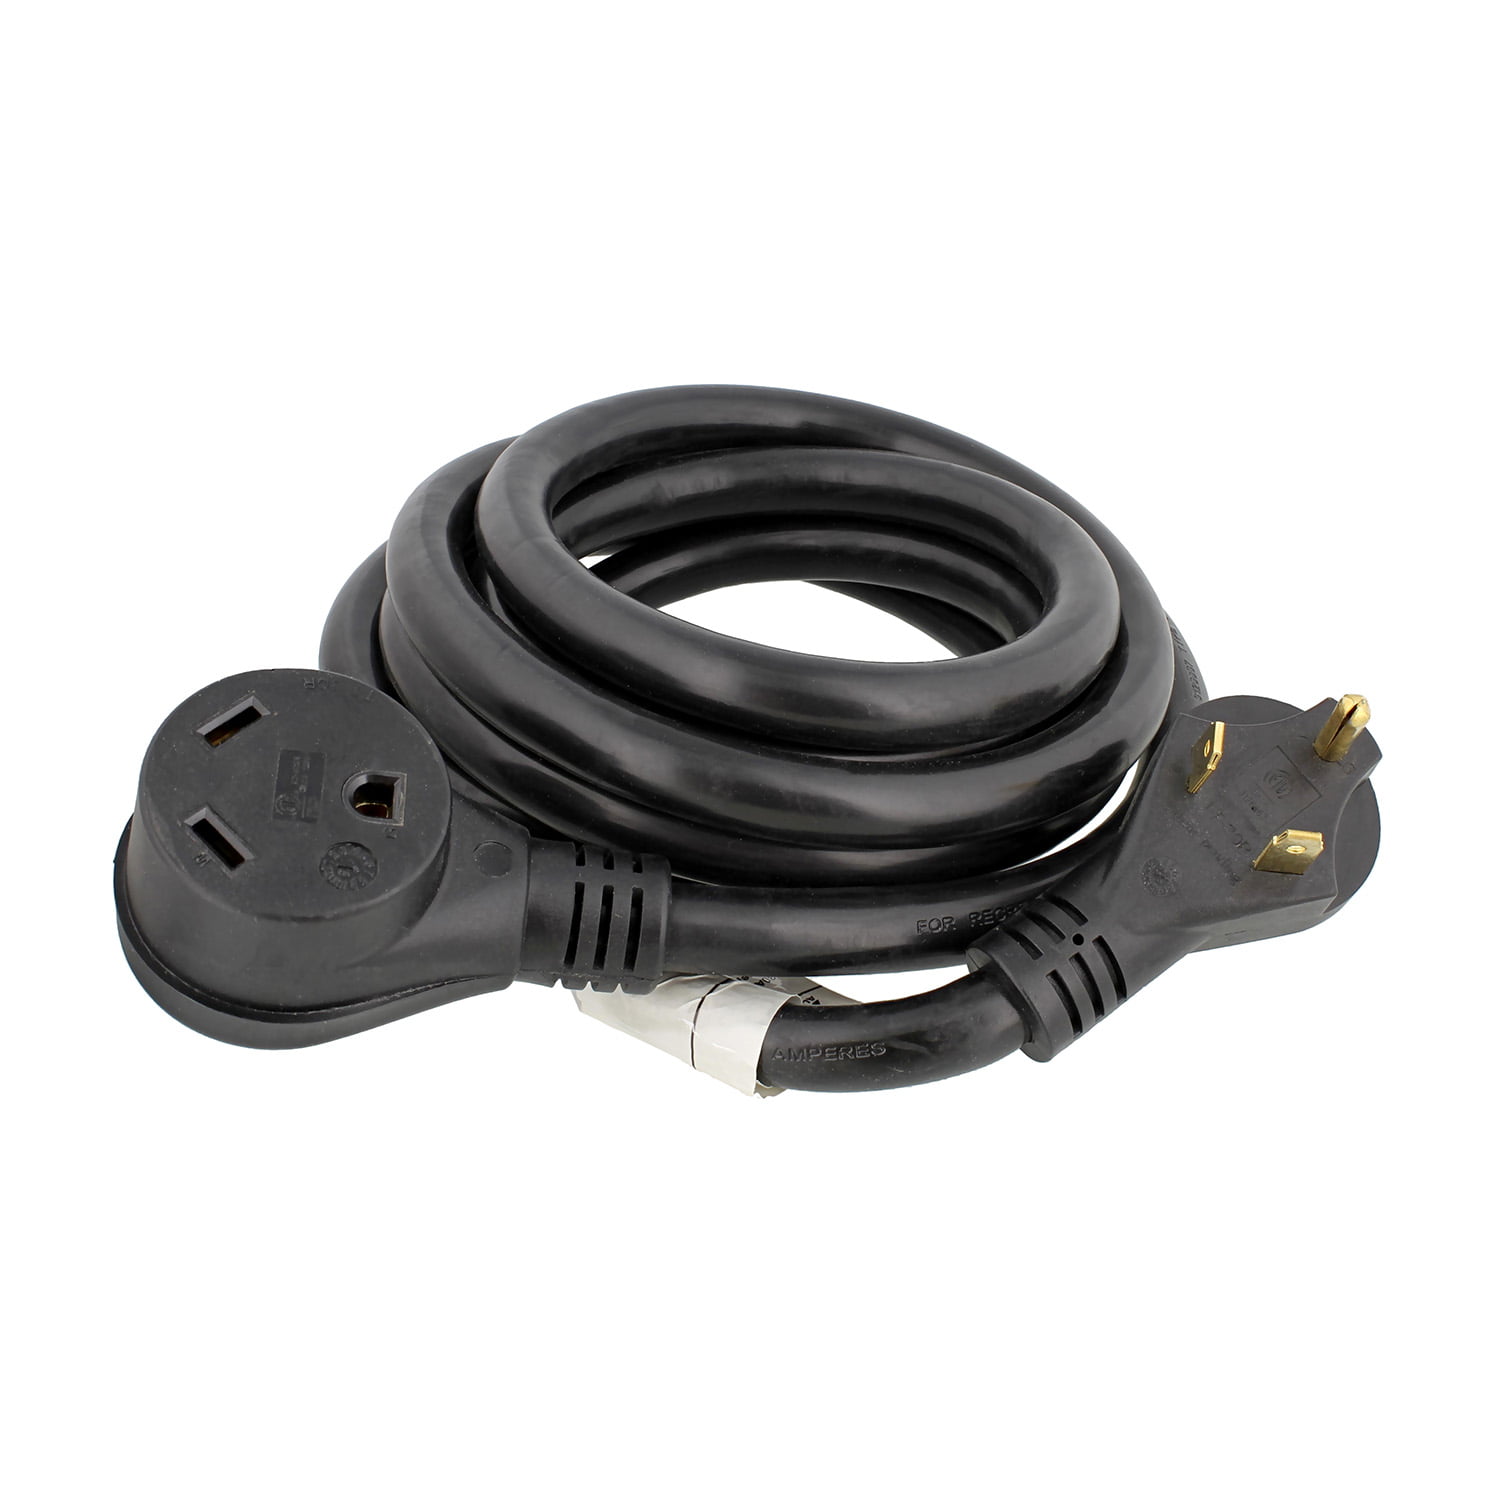 Abn 30 Amp Rv Power Cord W Female Receptacle 10 Foot Camper